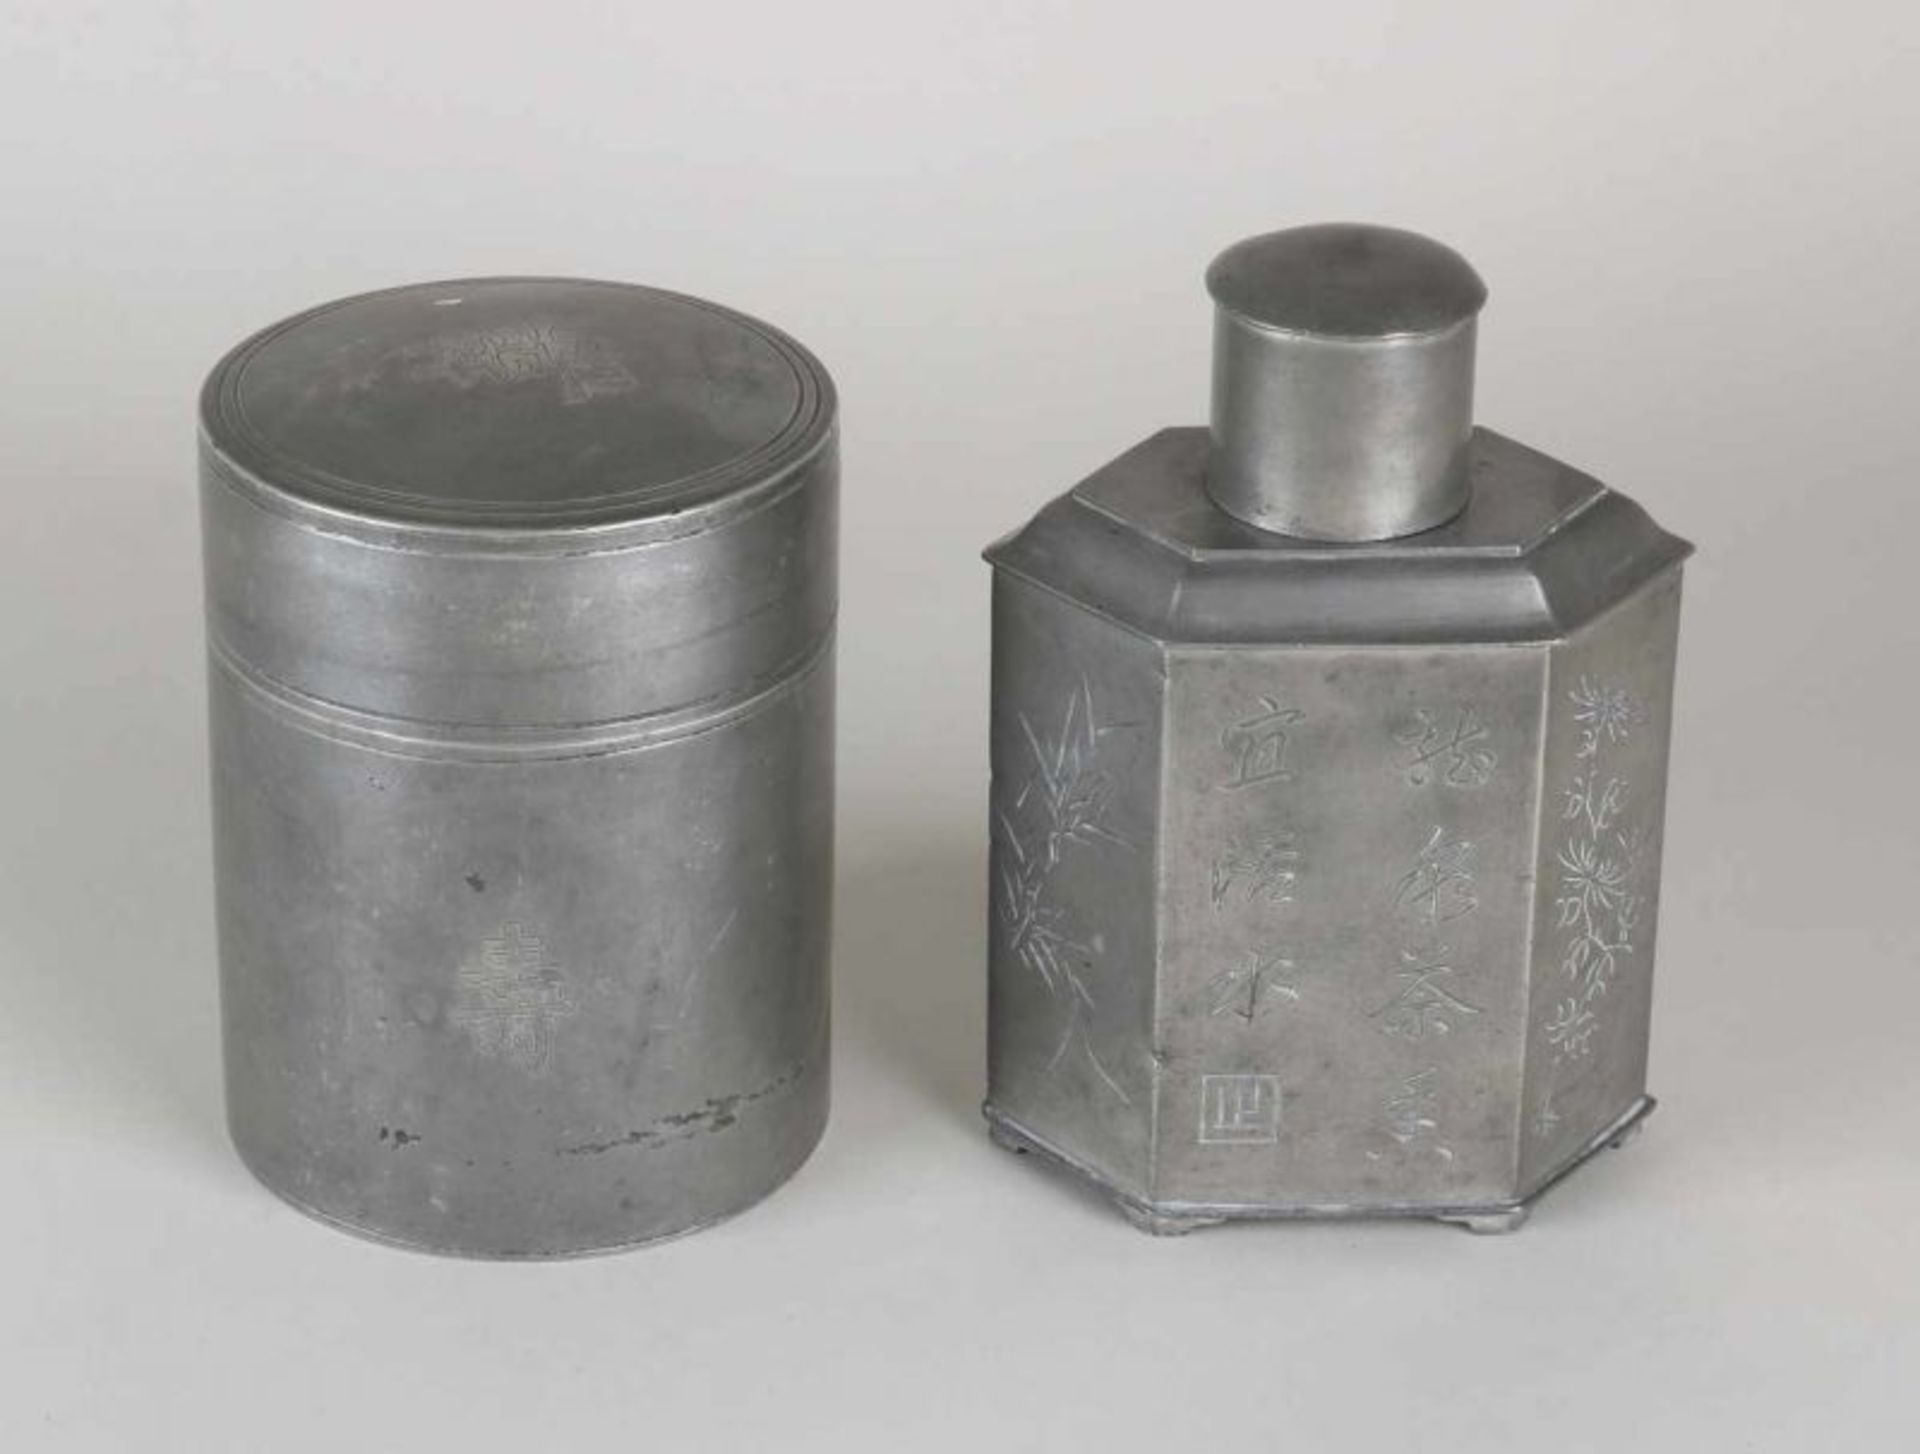 Two antique pewter tea caddies with Chinese characters. First half 20th century. Size 14.5 - 16